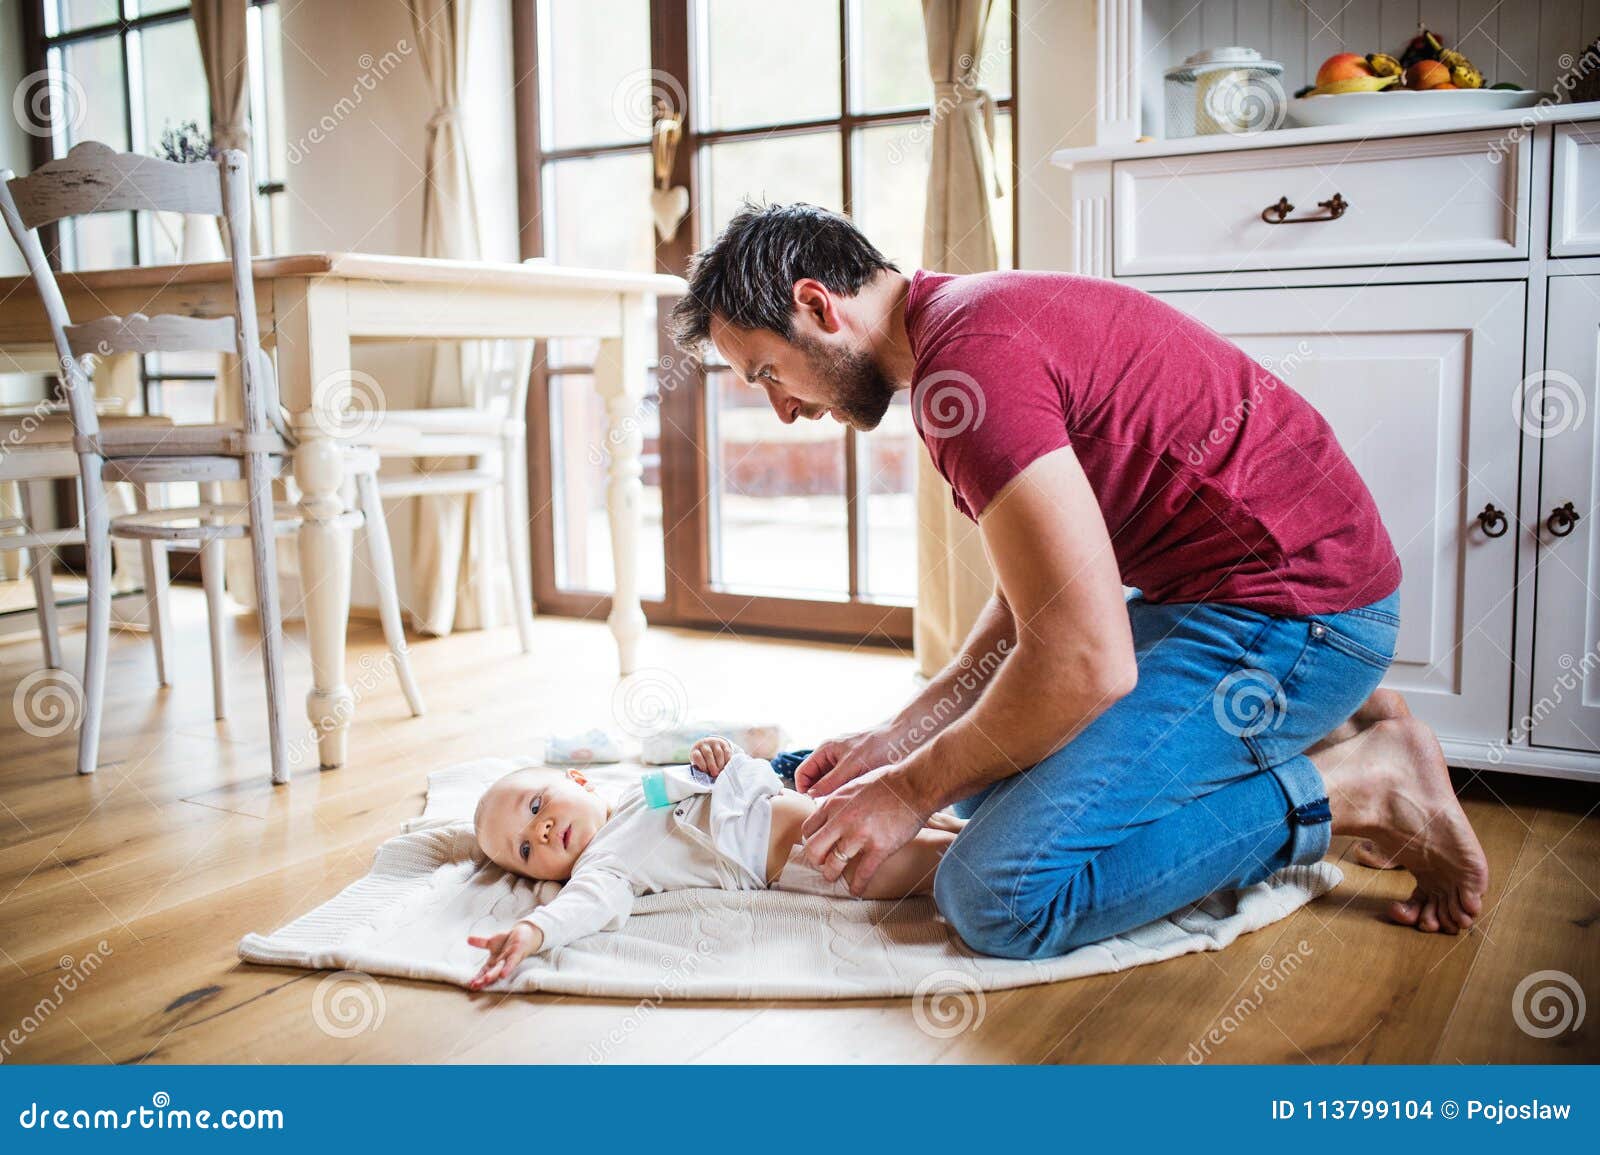 father changing a baby girl at home.